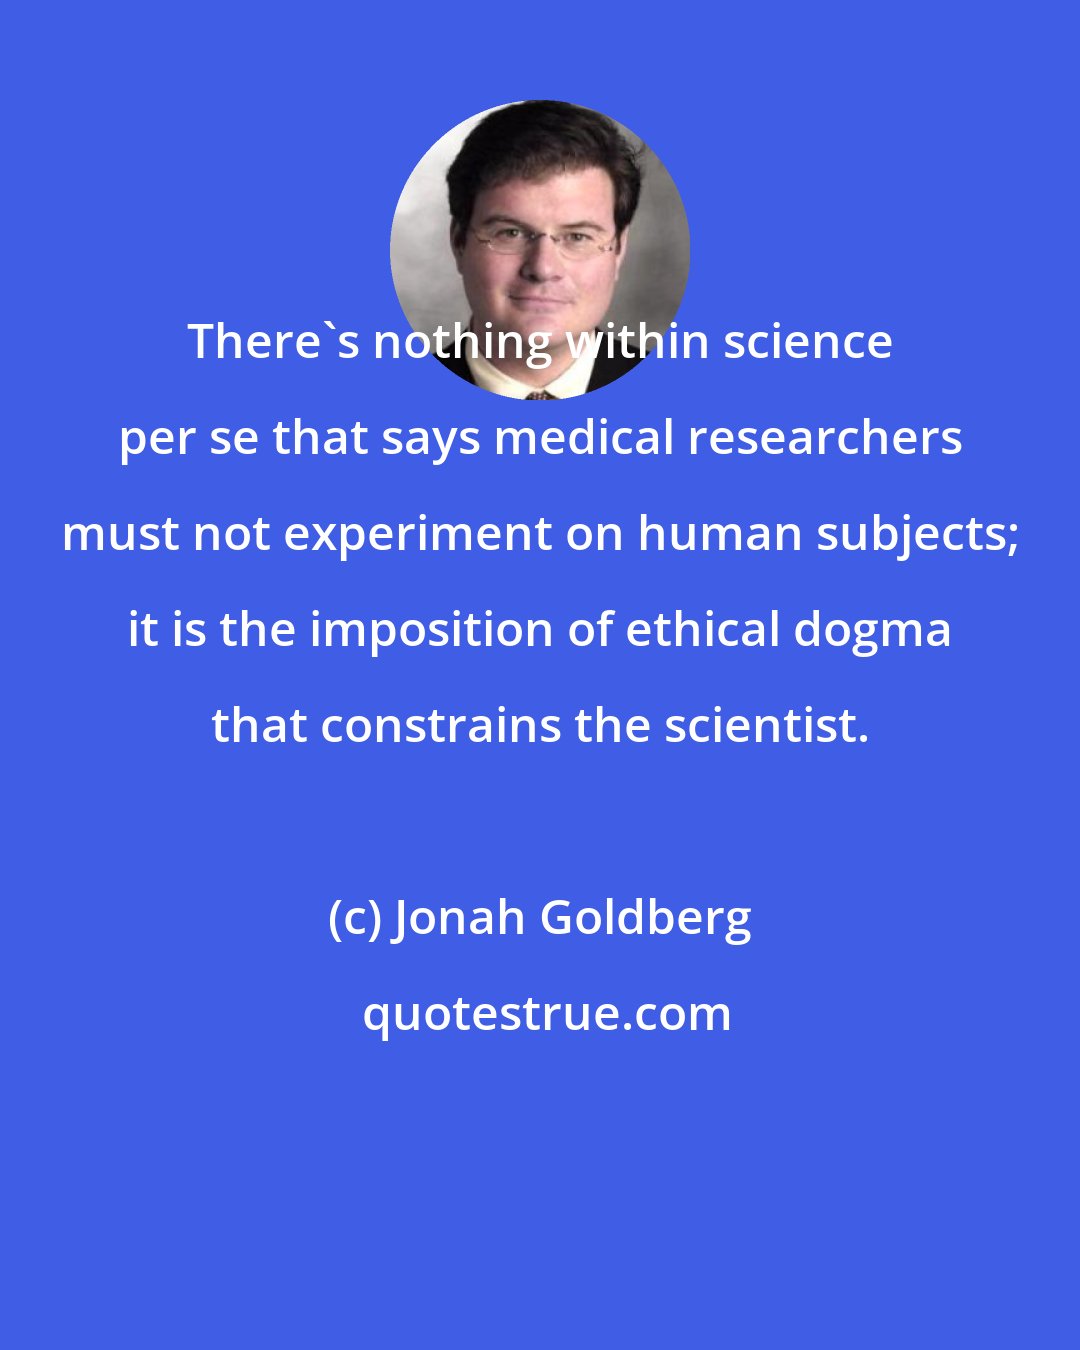 Jonah Goldberg: There's nothing within science per se that says medical researchers must not experiment on human subjects; it is the imposition of ethical dogma that constrains the scientist.